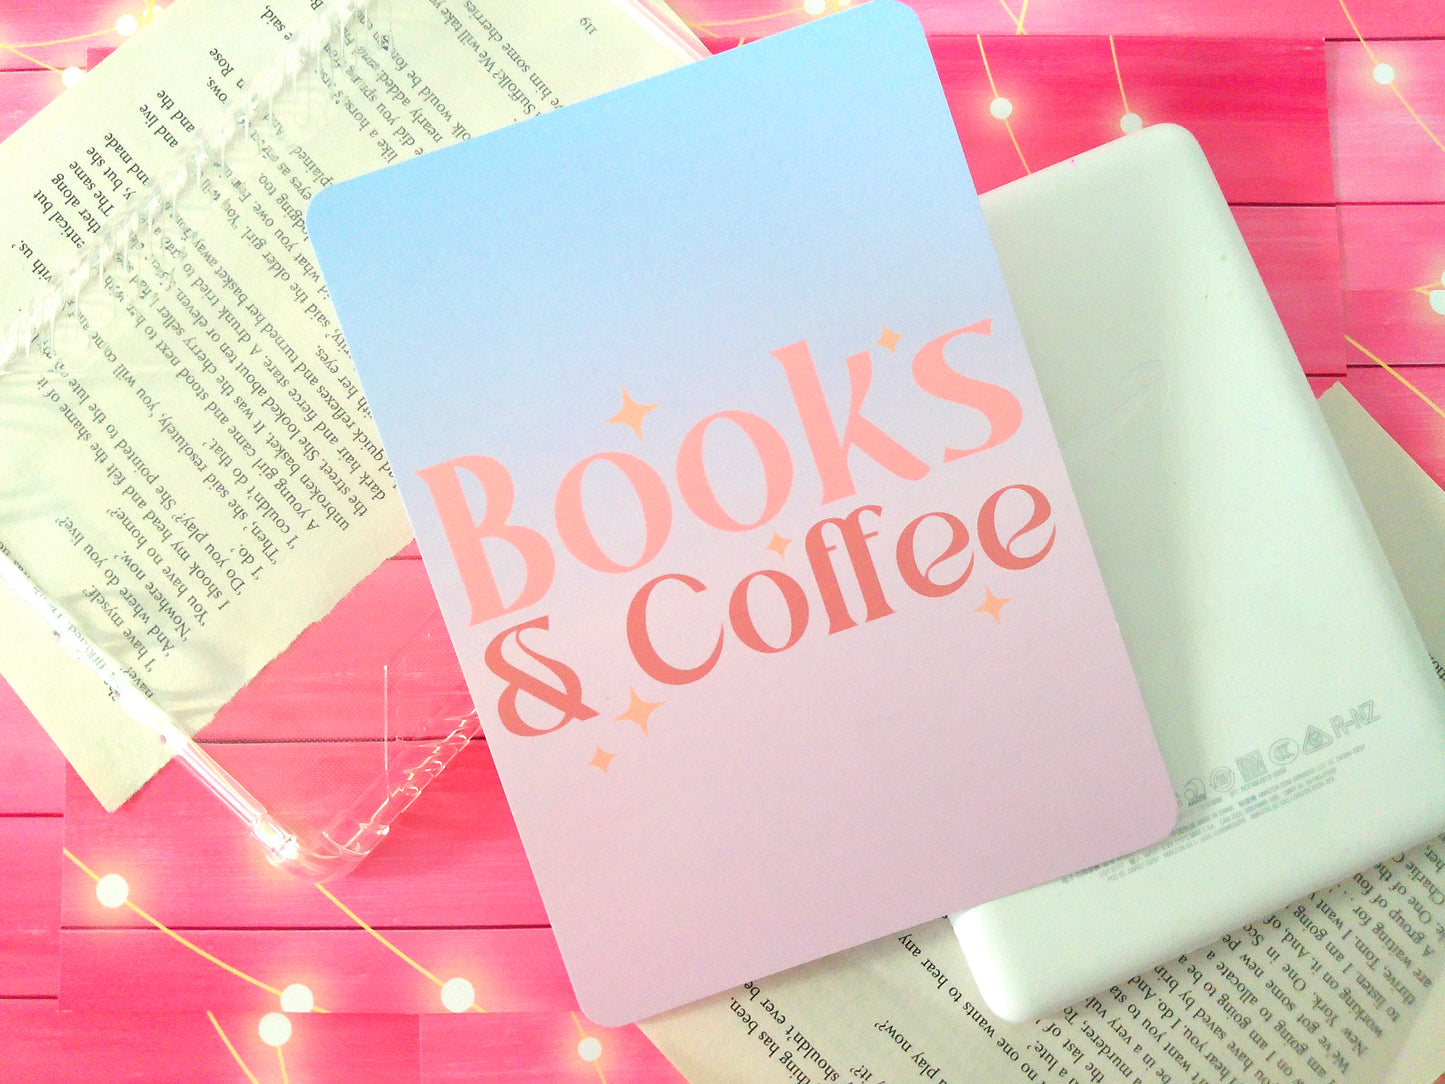 Books & Coffee, Shh I’m Reading, Read in Peace Kindle Inserts